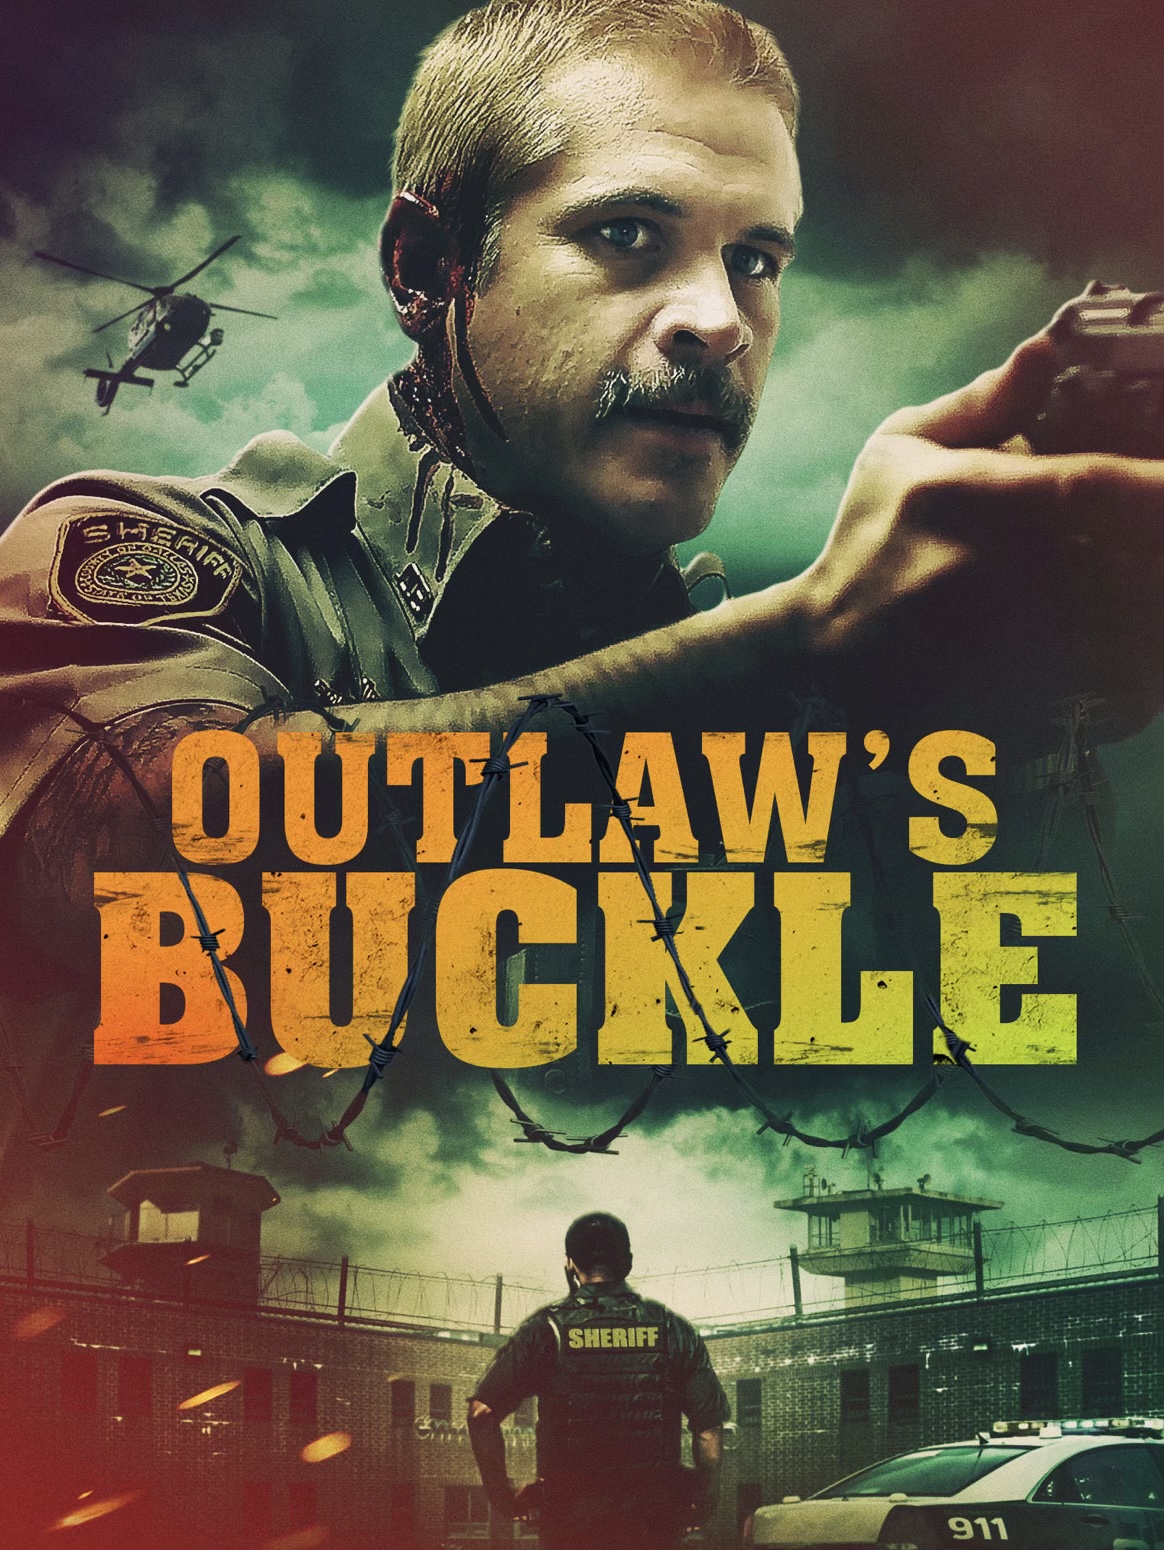 Outlaw's Buckle (2021)